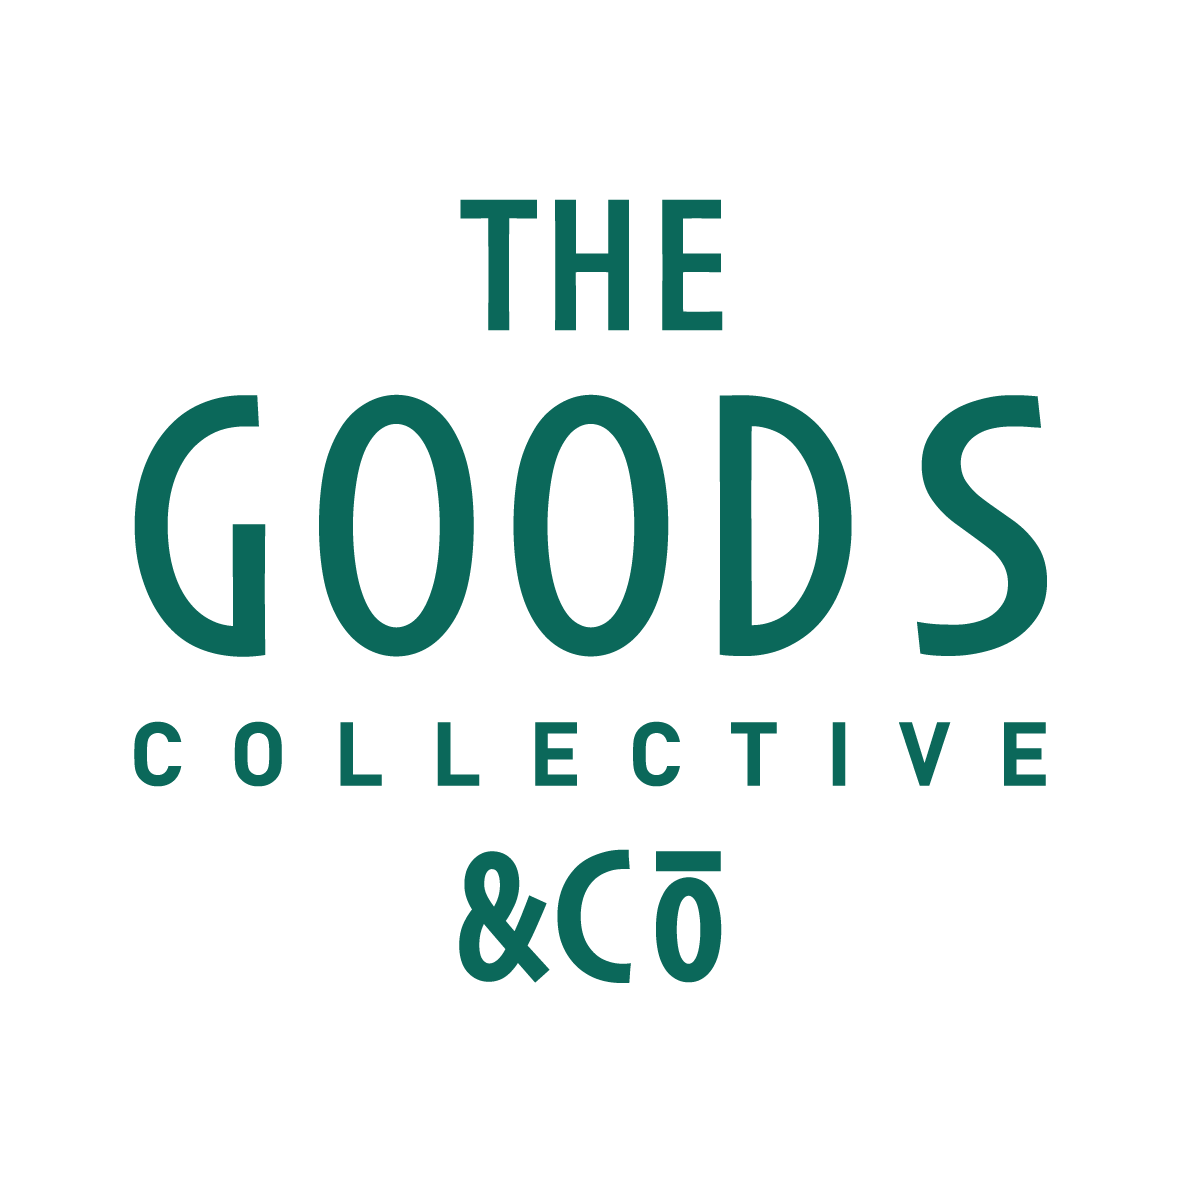 The Goods Collective & Co